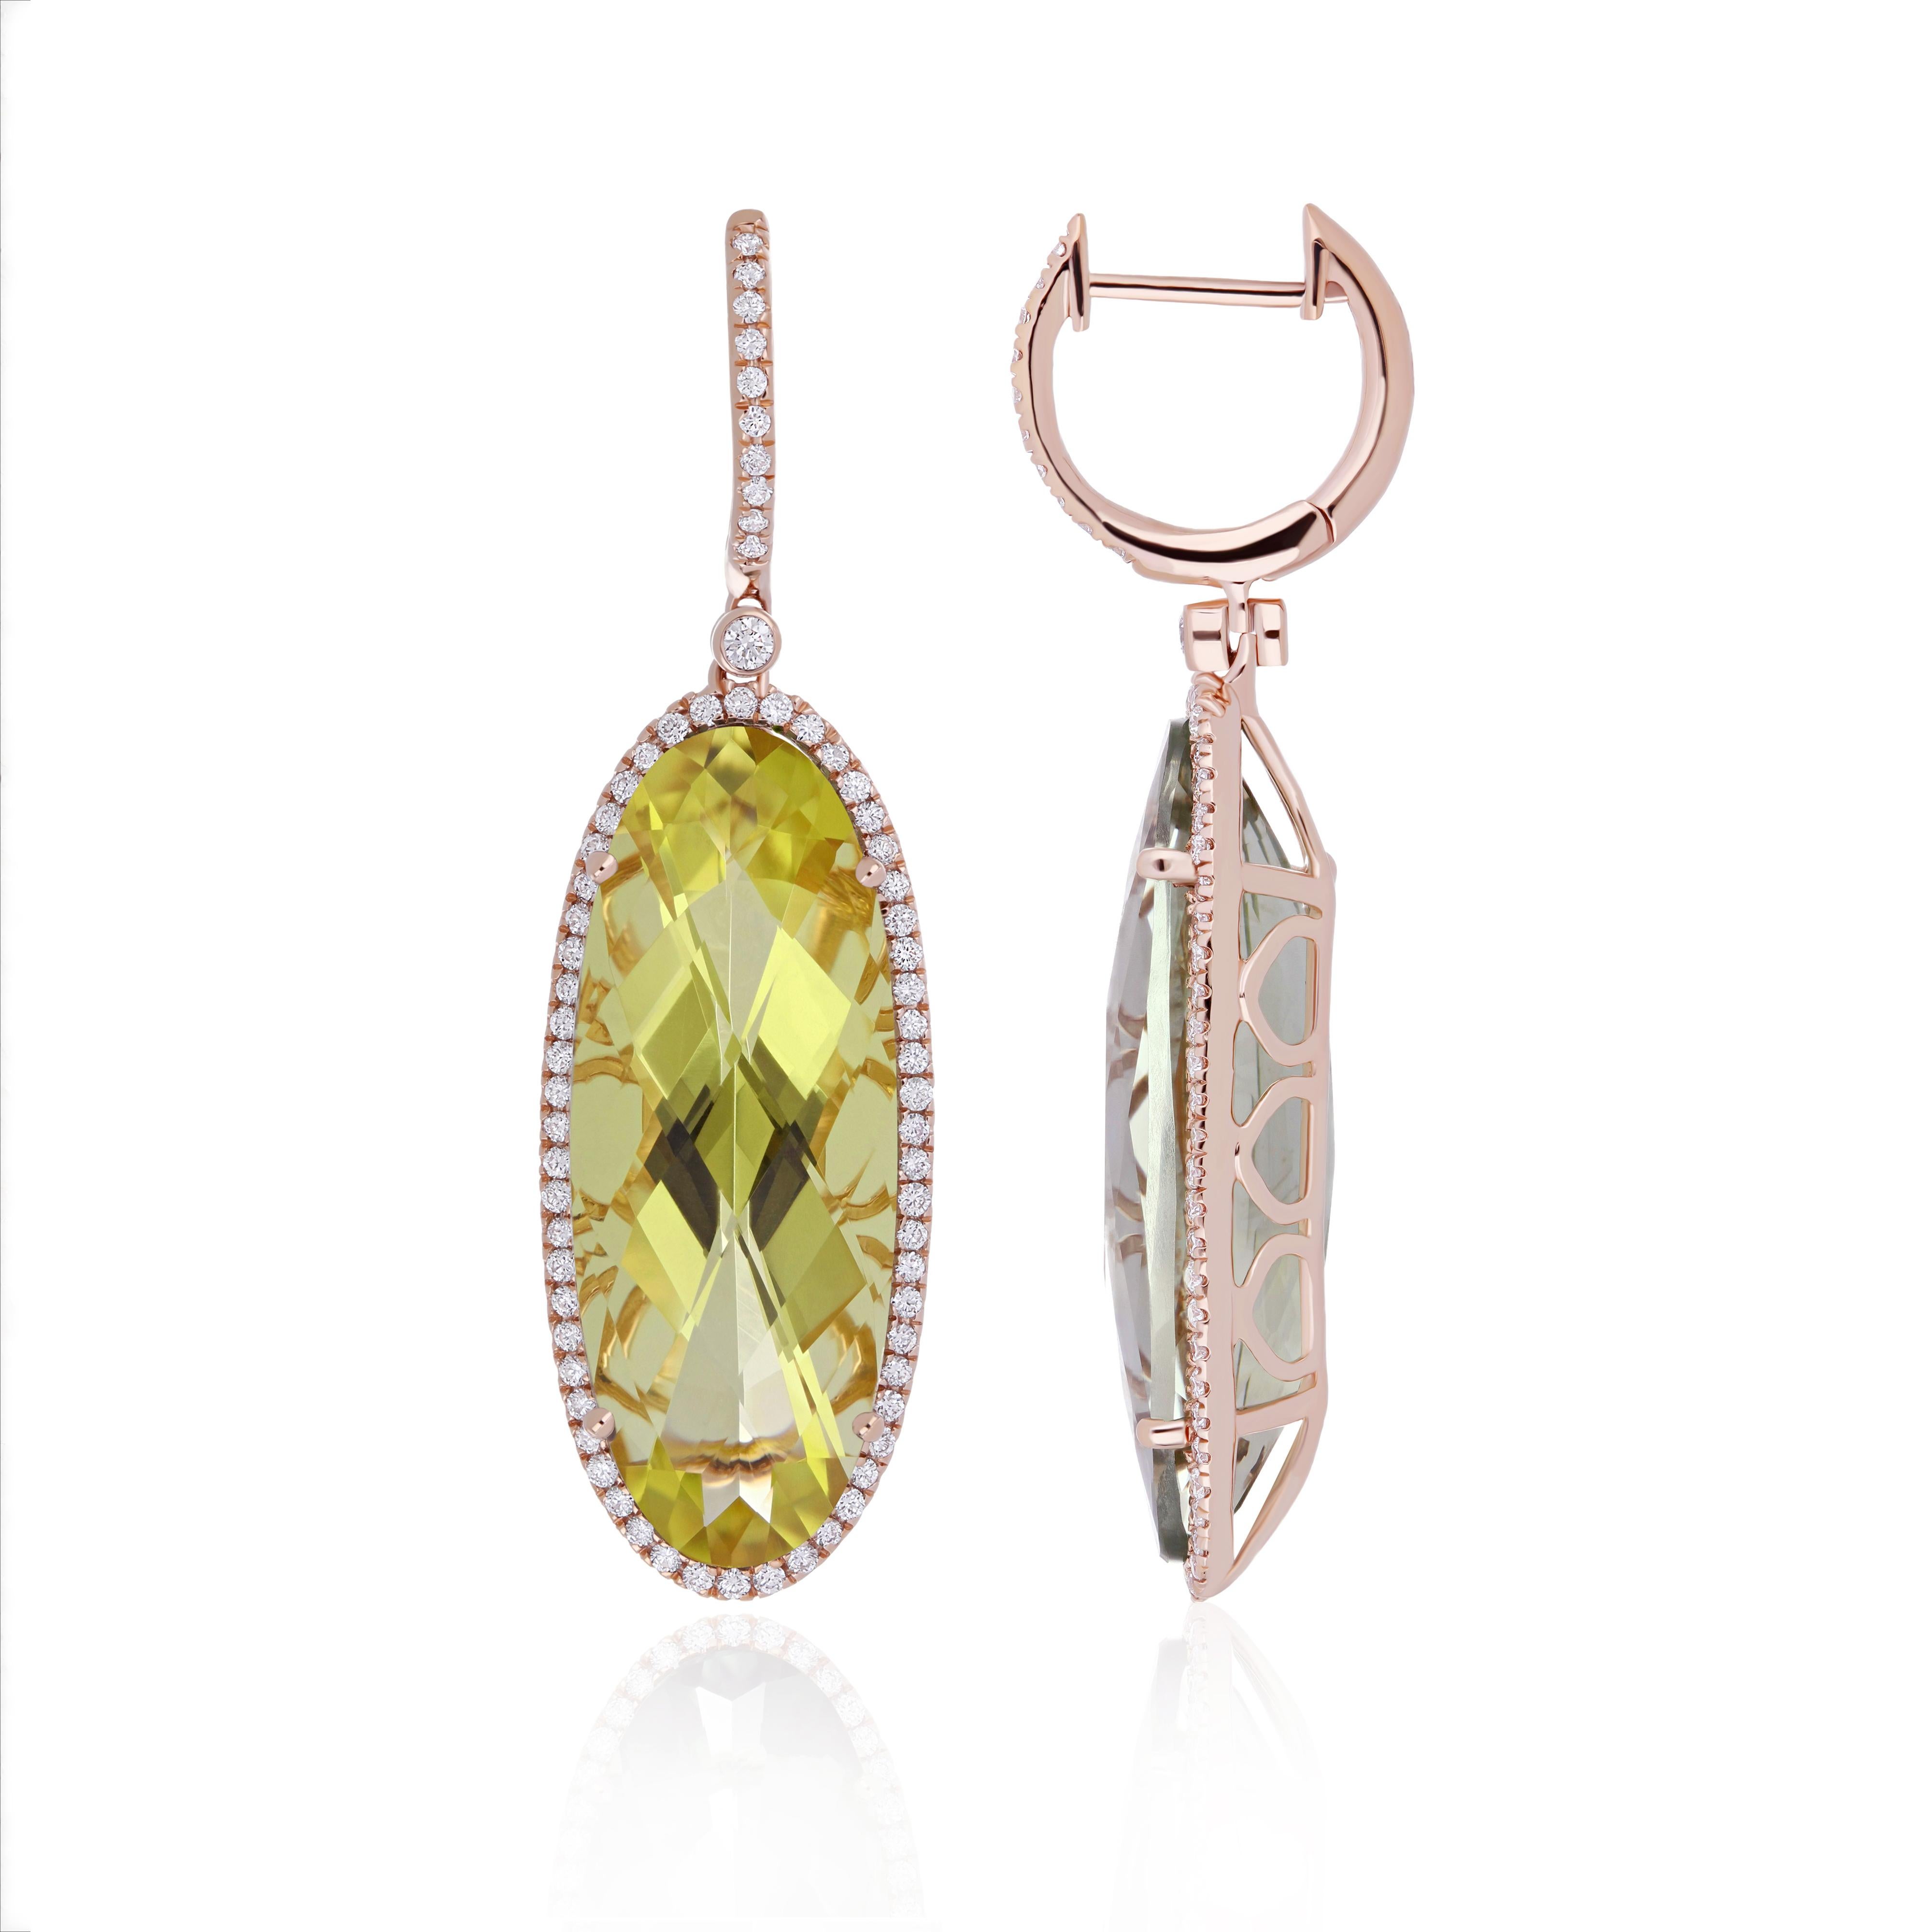 Elegant and Exquisitely Detailed Rose Gold mismatched set of Earrings with Oval Shape Lemon Citrine weighing approx.  11.75 Cts and Mint Quartz in Oval Shape weighing approx. 9.96Cts and surrounded with micro pave set Diamonds weighing approx. 0.68